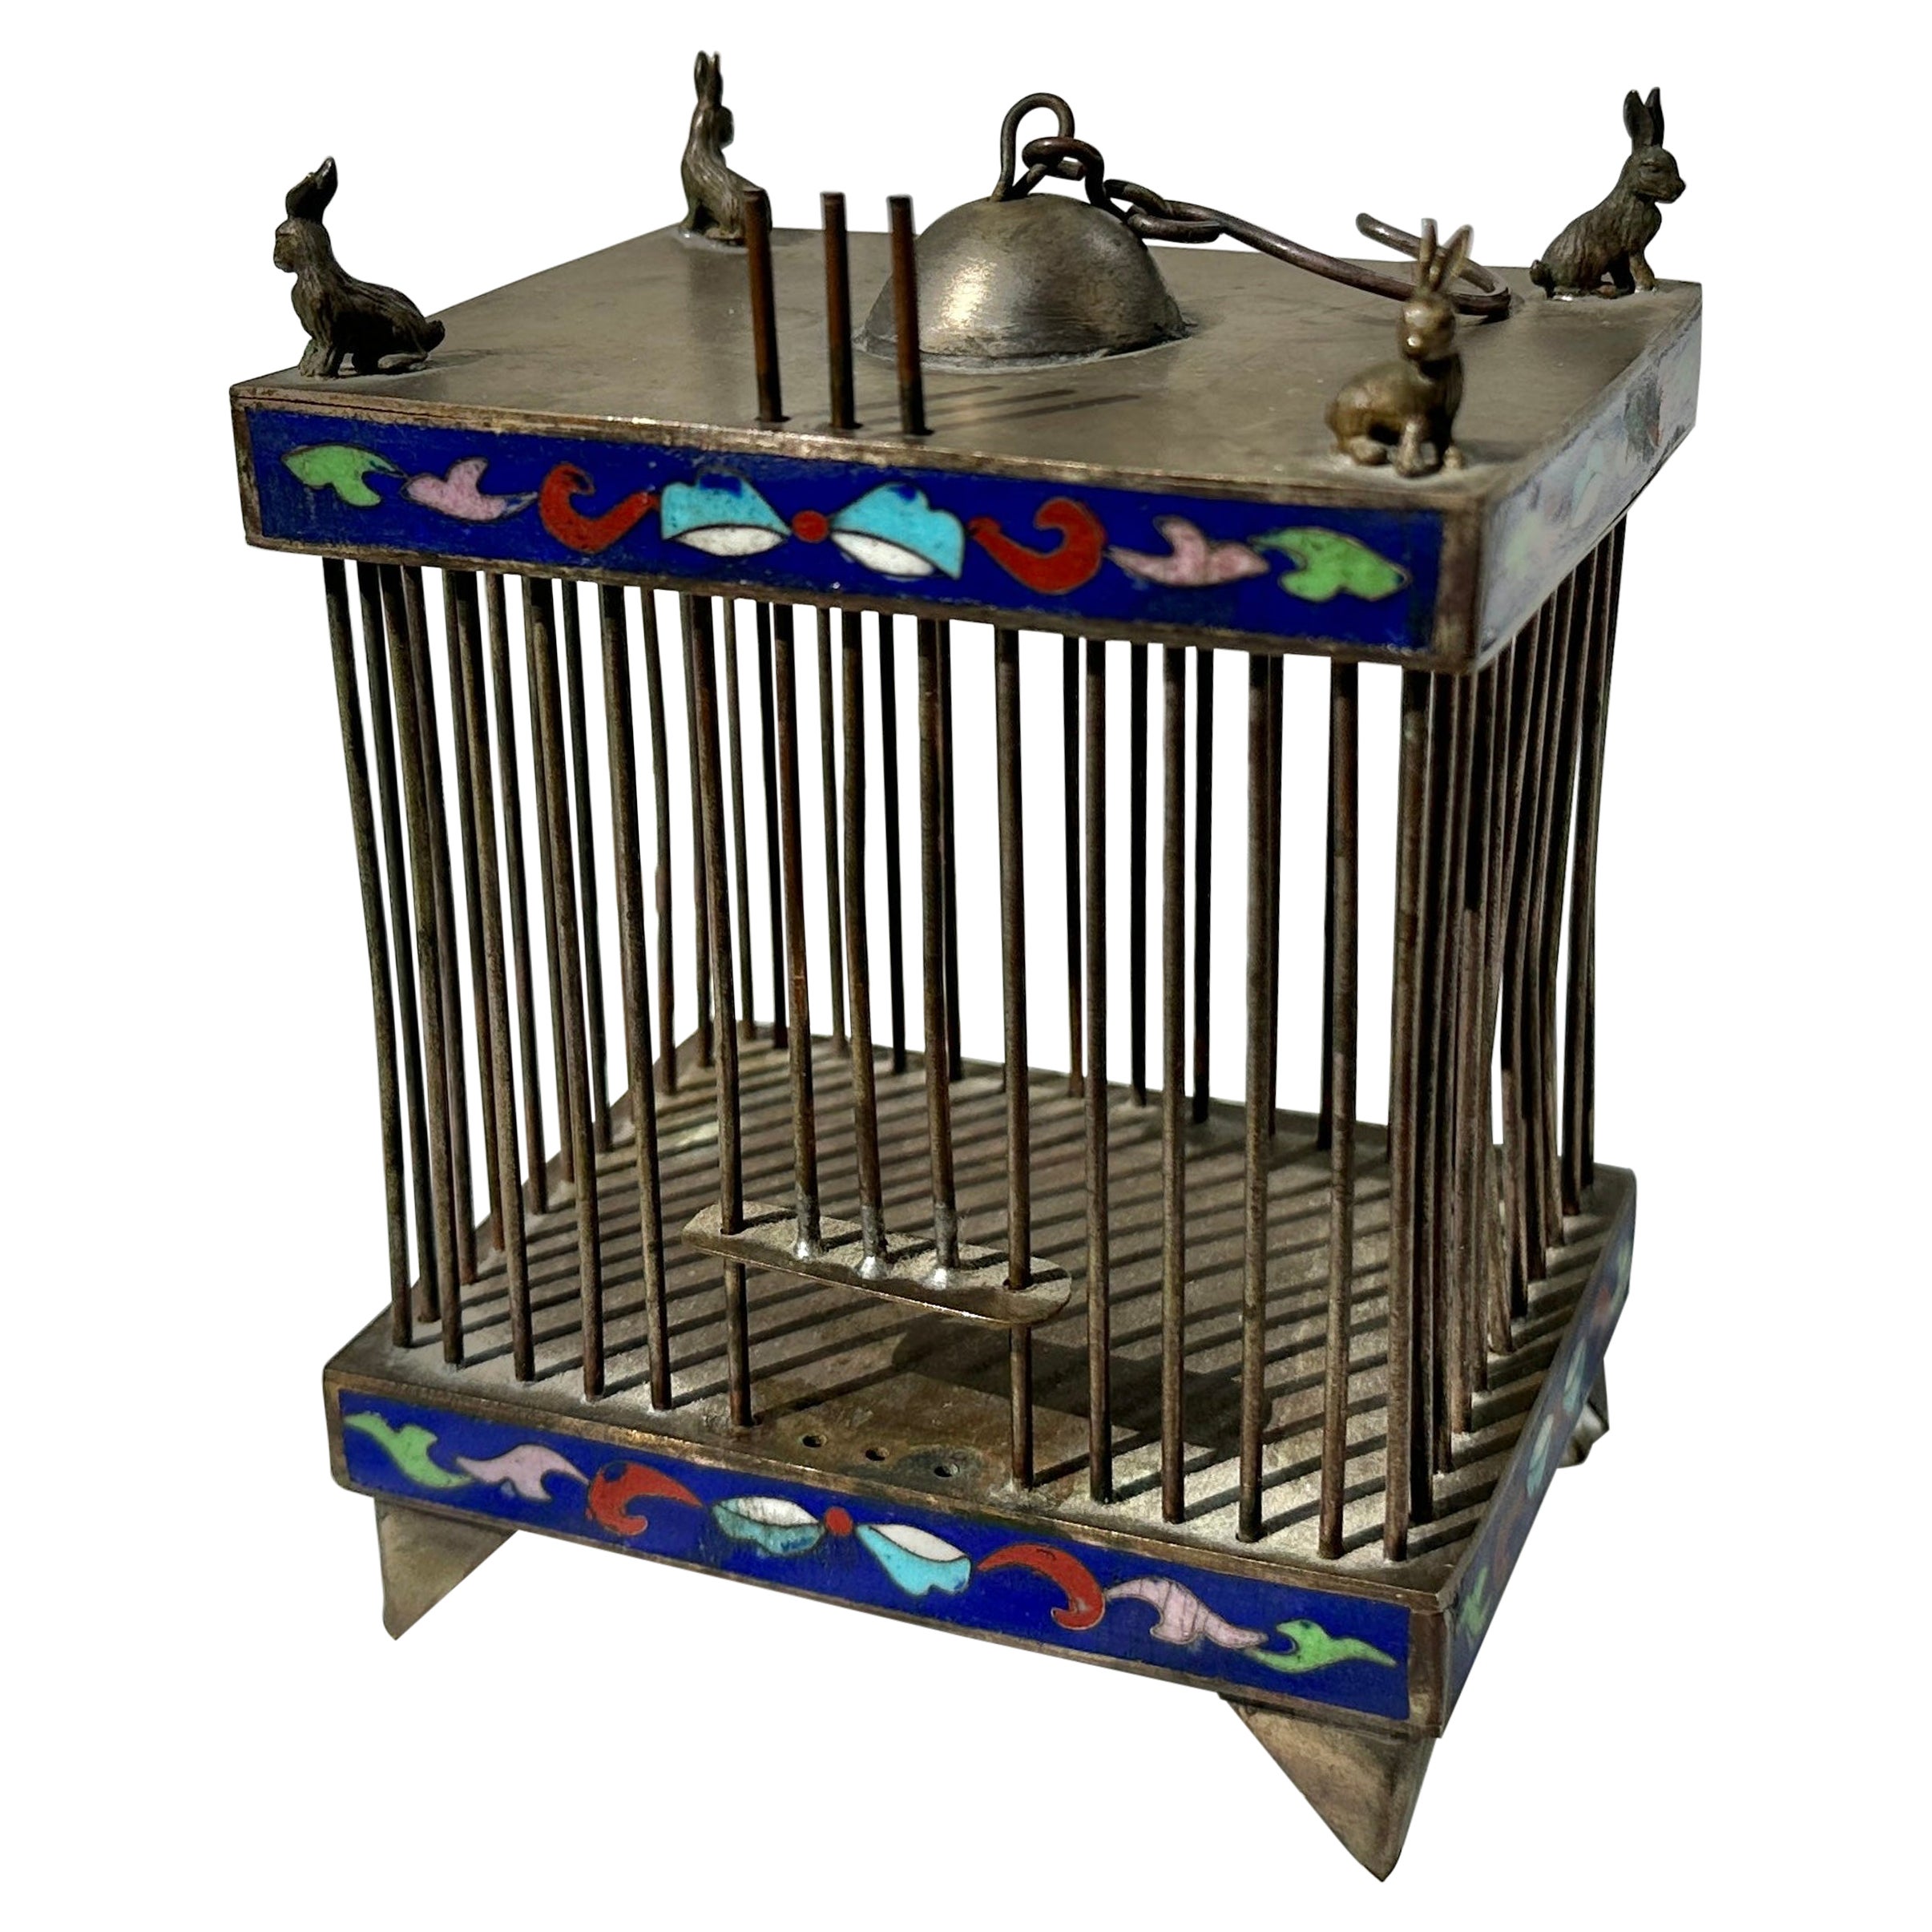 Cricket Cage With Rabbits Cloisonne Enamel Silver Rare Chinese Antique 1890 For Sale